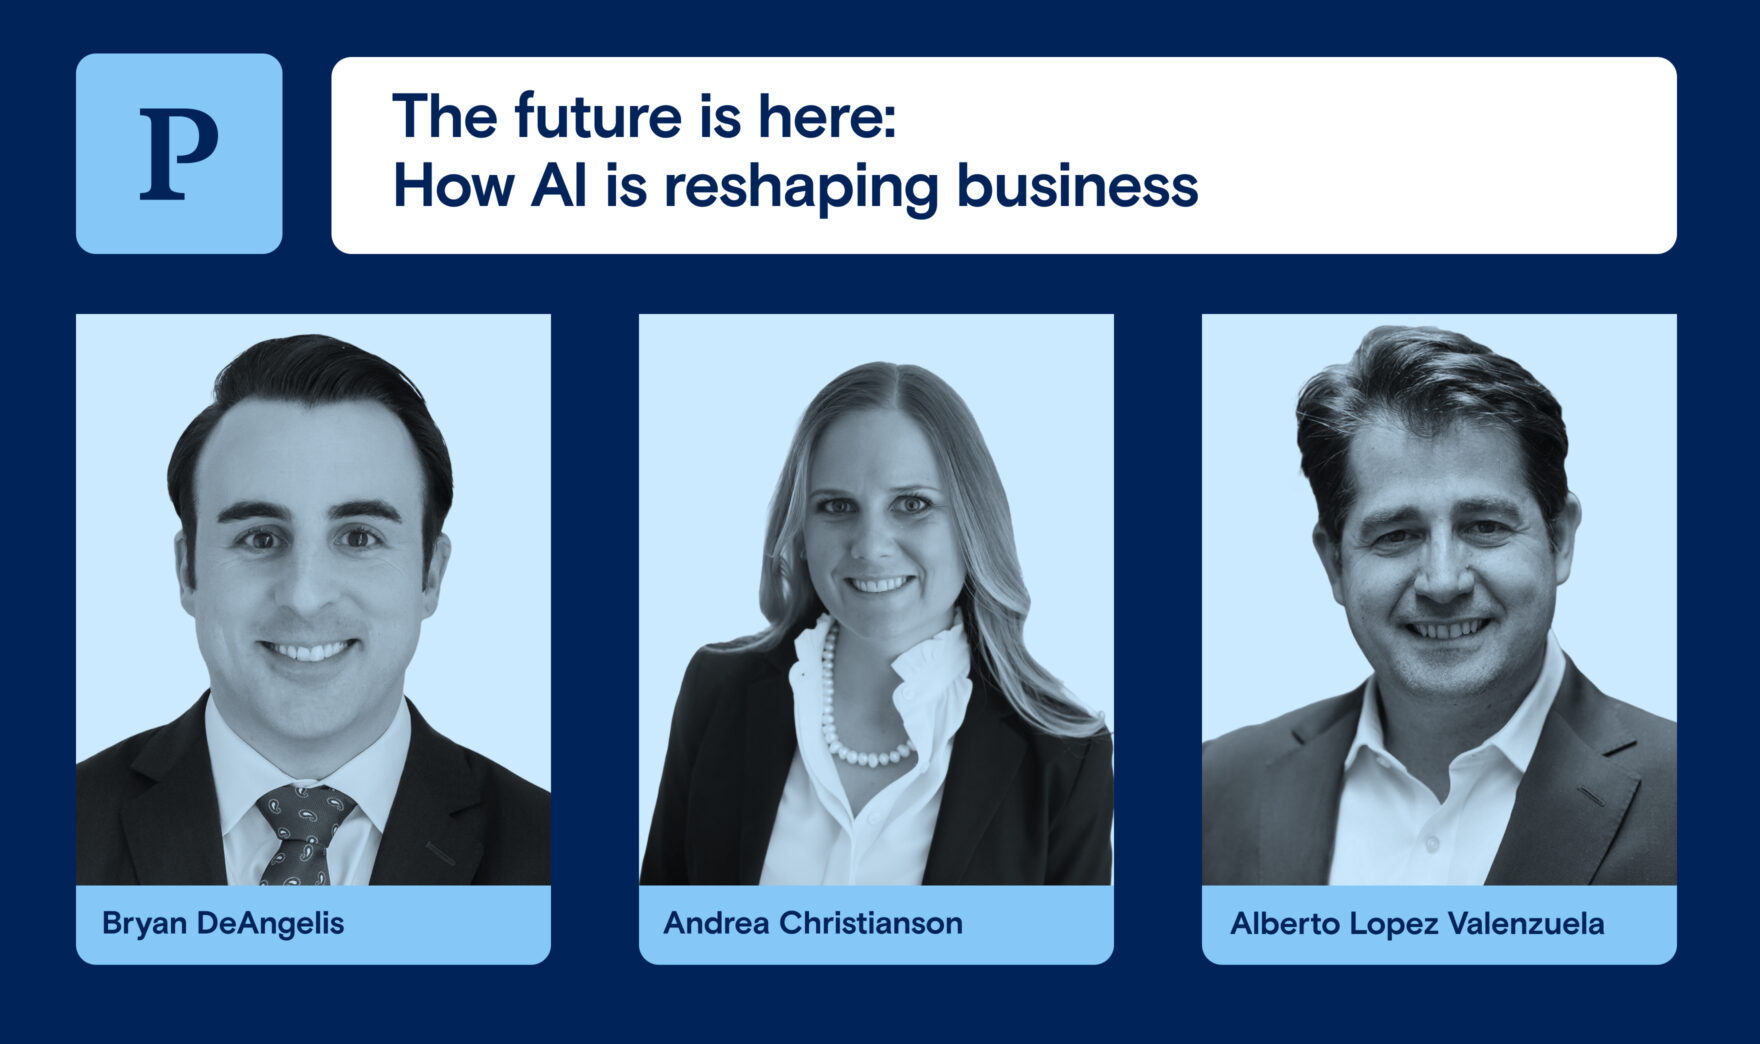 The future is here: How AI is reshaping business